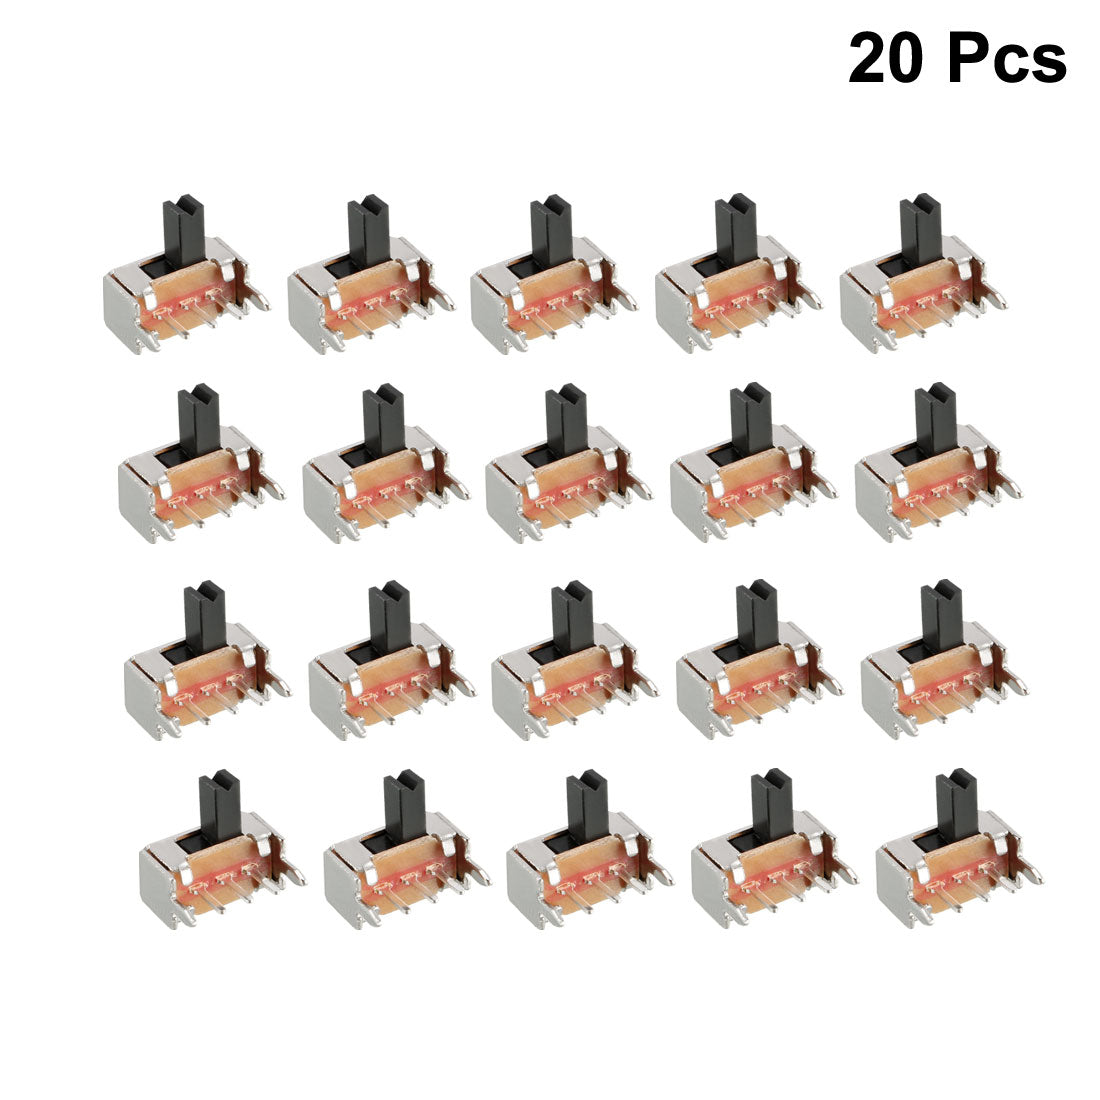 uxcell Uxcell 20Pcs 3mm Horizontal Slide Switch SPDT 1P2T 3 Terminals PCB Panel Latching